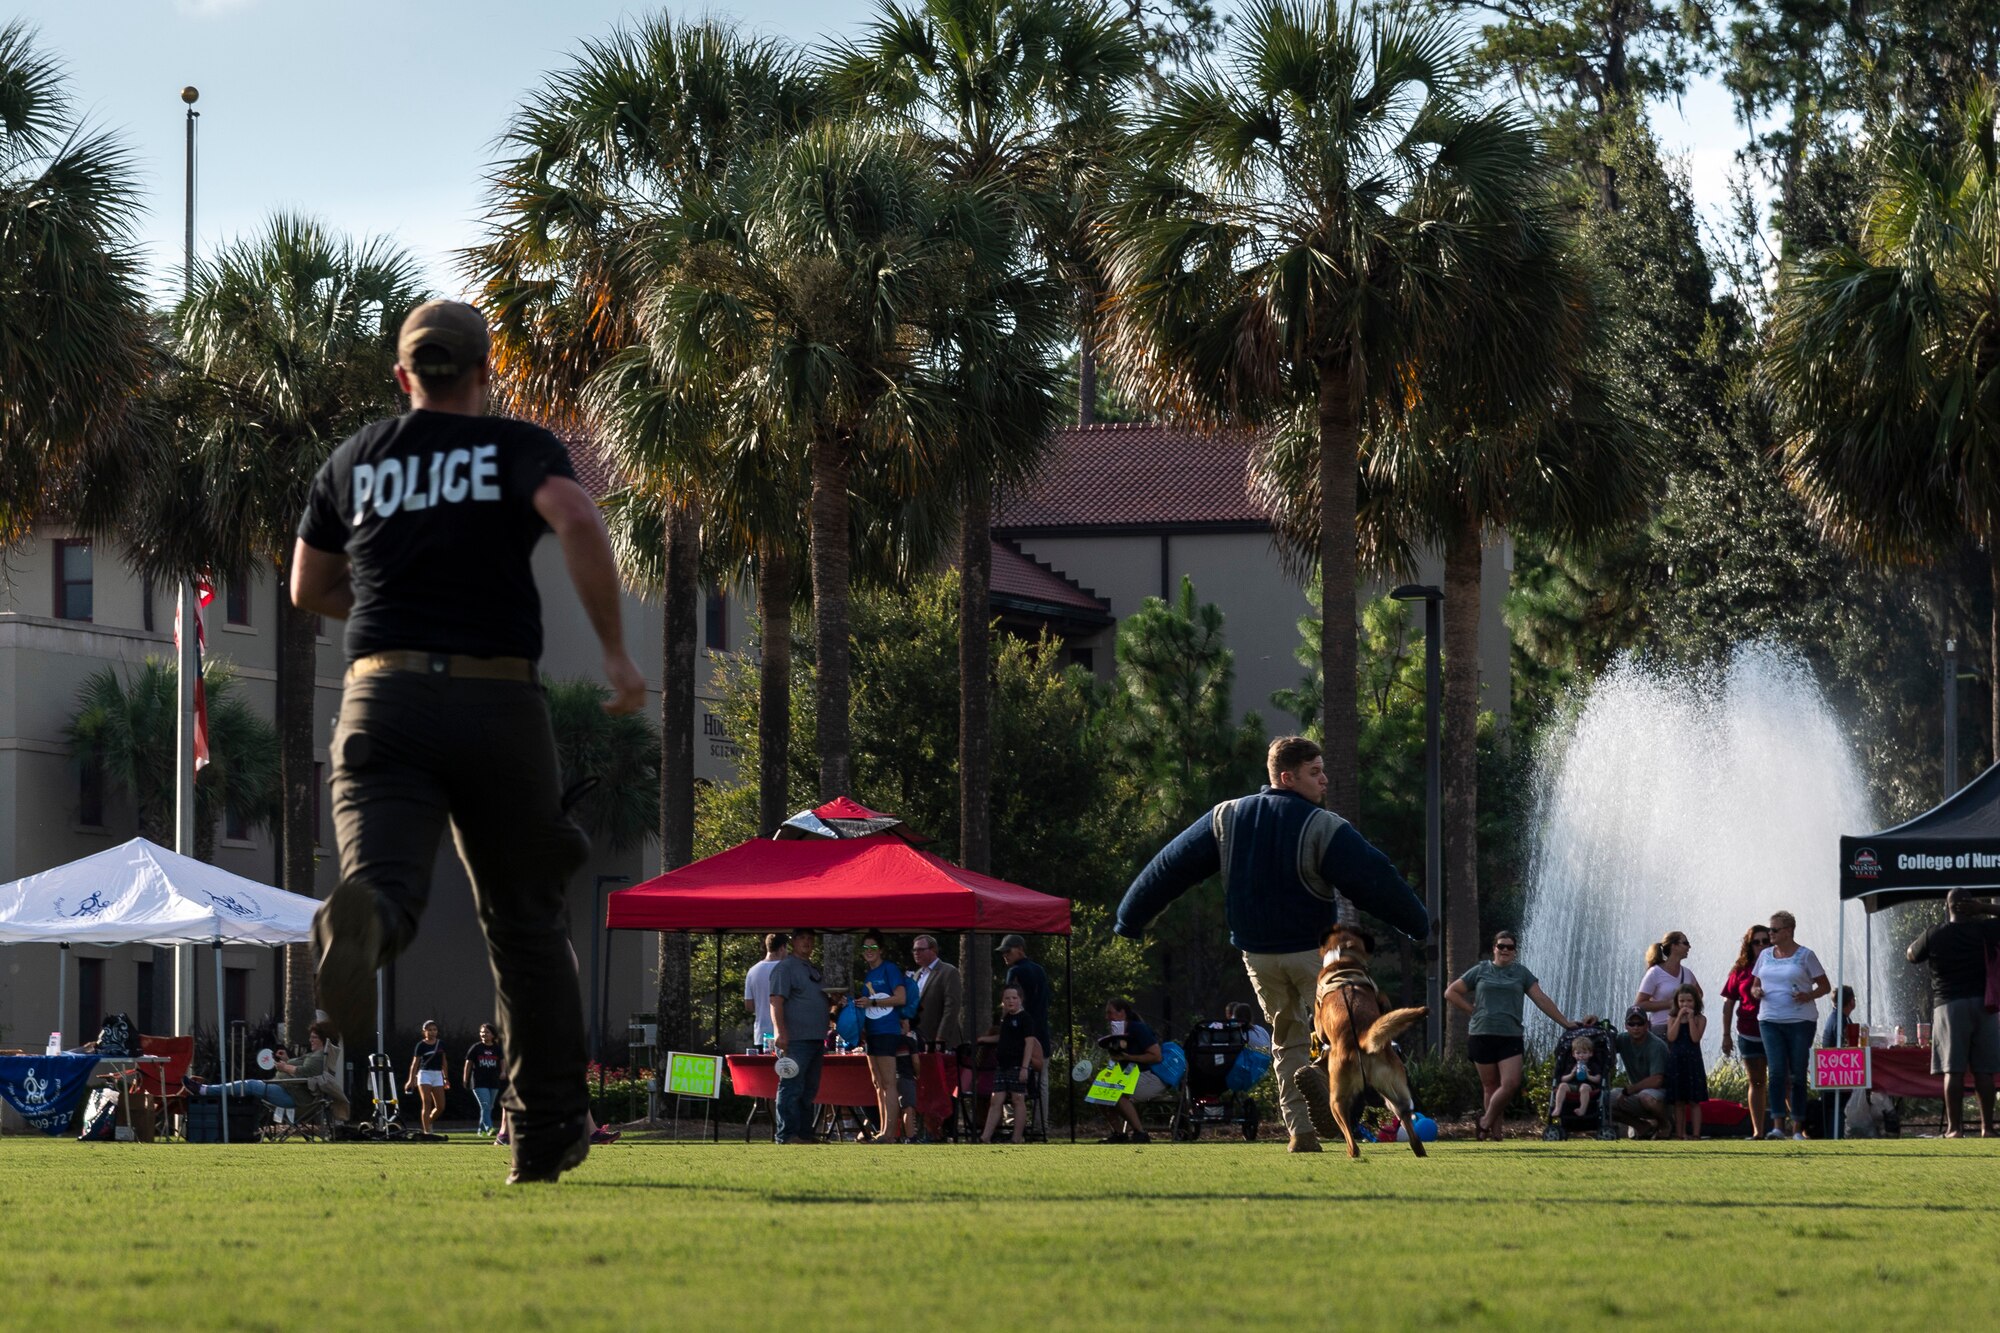 Airmen assigned to the 23d Security Forces Squadron (SFS) perform a military working dog demonstration during National Night Out at the main campus of Valdosta State University Aug. 6, 2019, in Valdosta, Ga. National Night Out is an annual event that promotes relationships between police and the community in an effort to prevent crime. Representatives from Team Moody participated to create local community awareness and build support for the Air Force mission. (U.S. Air Force photo by Airman 1st Class Hayden Legg)